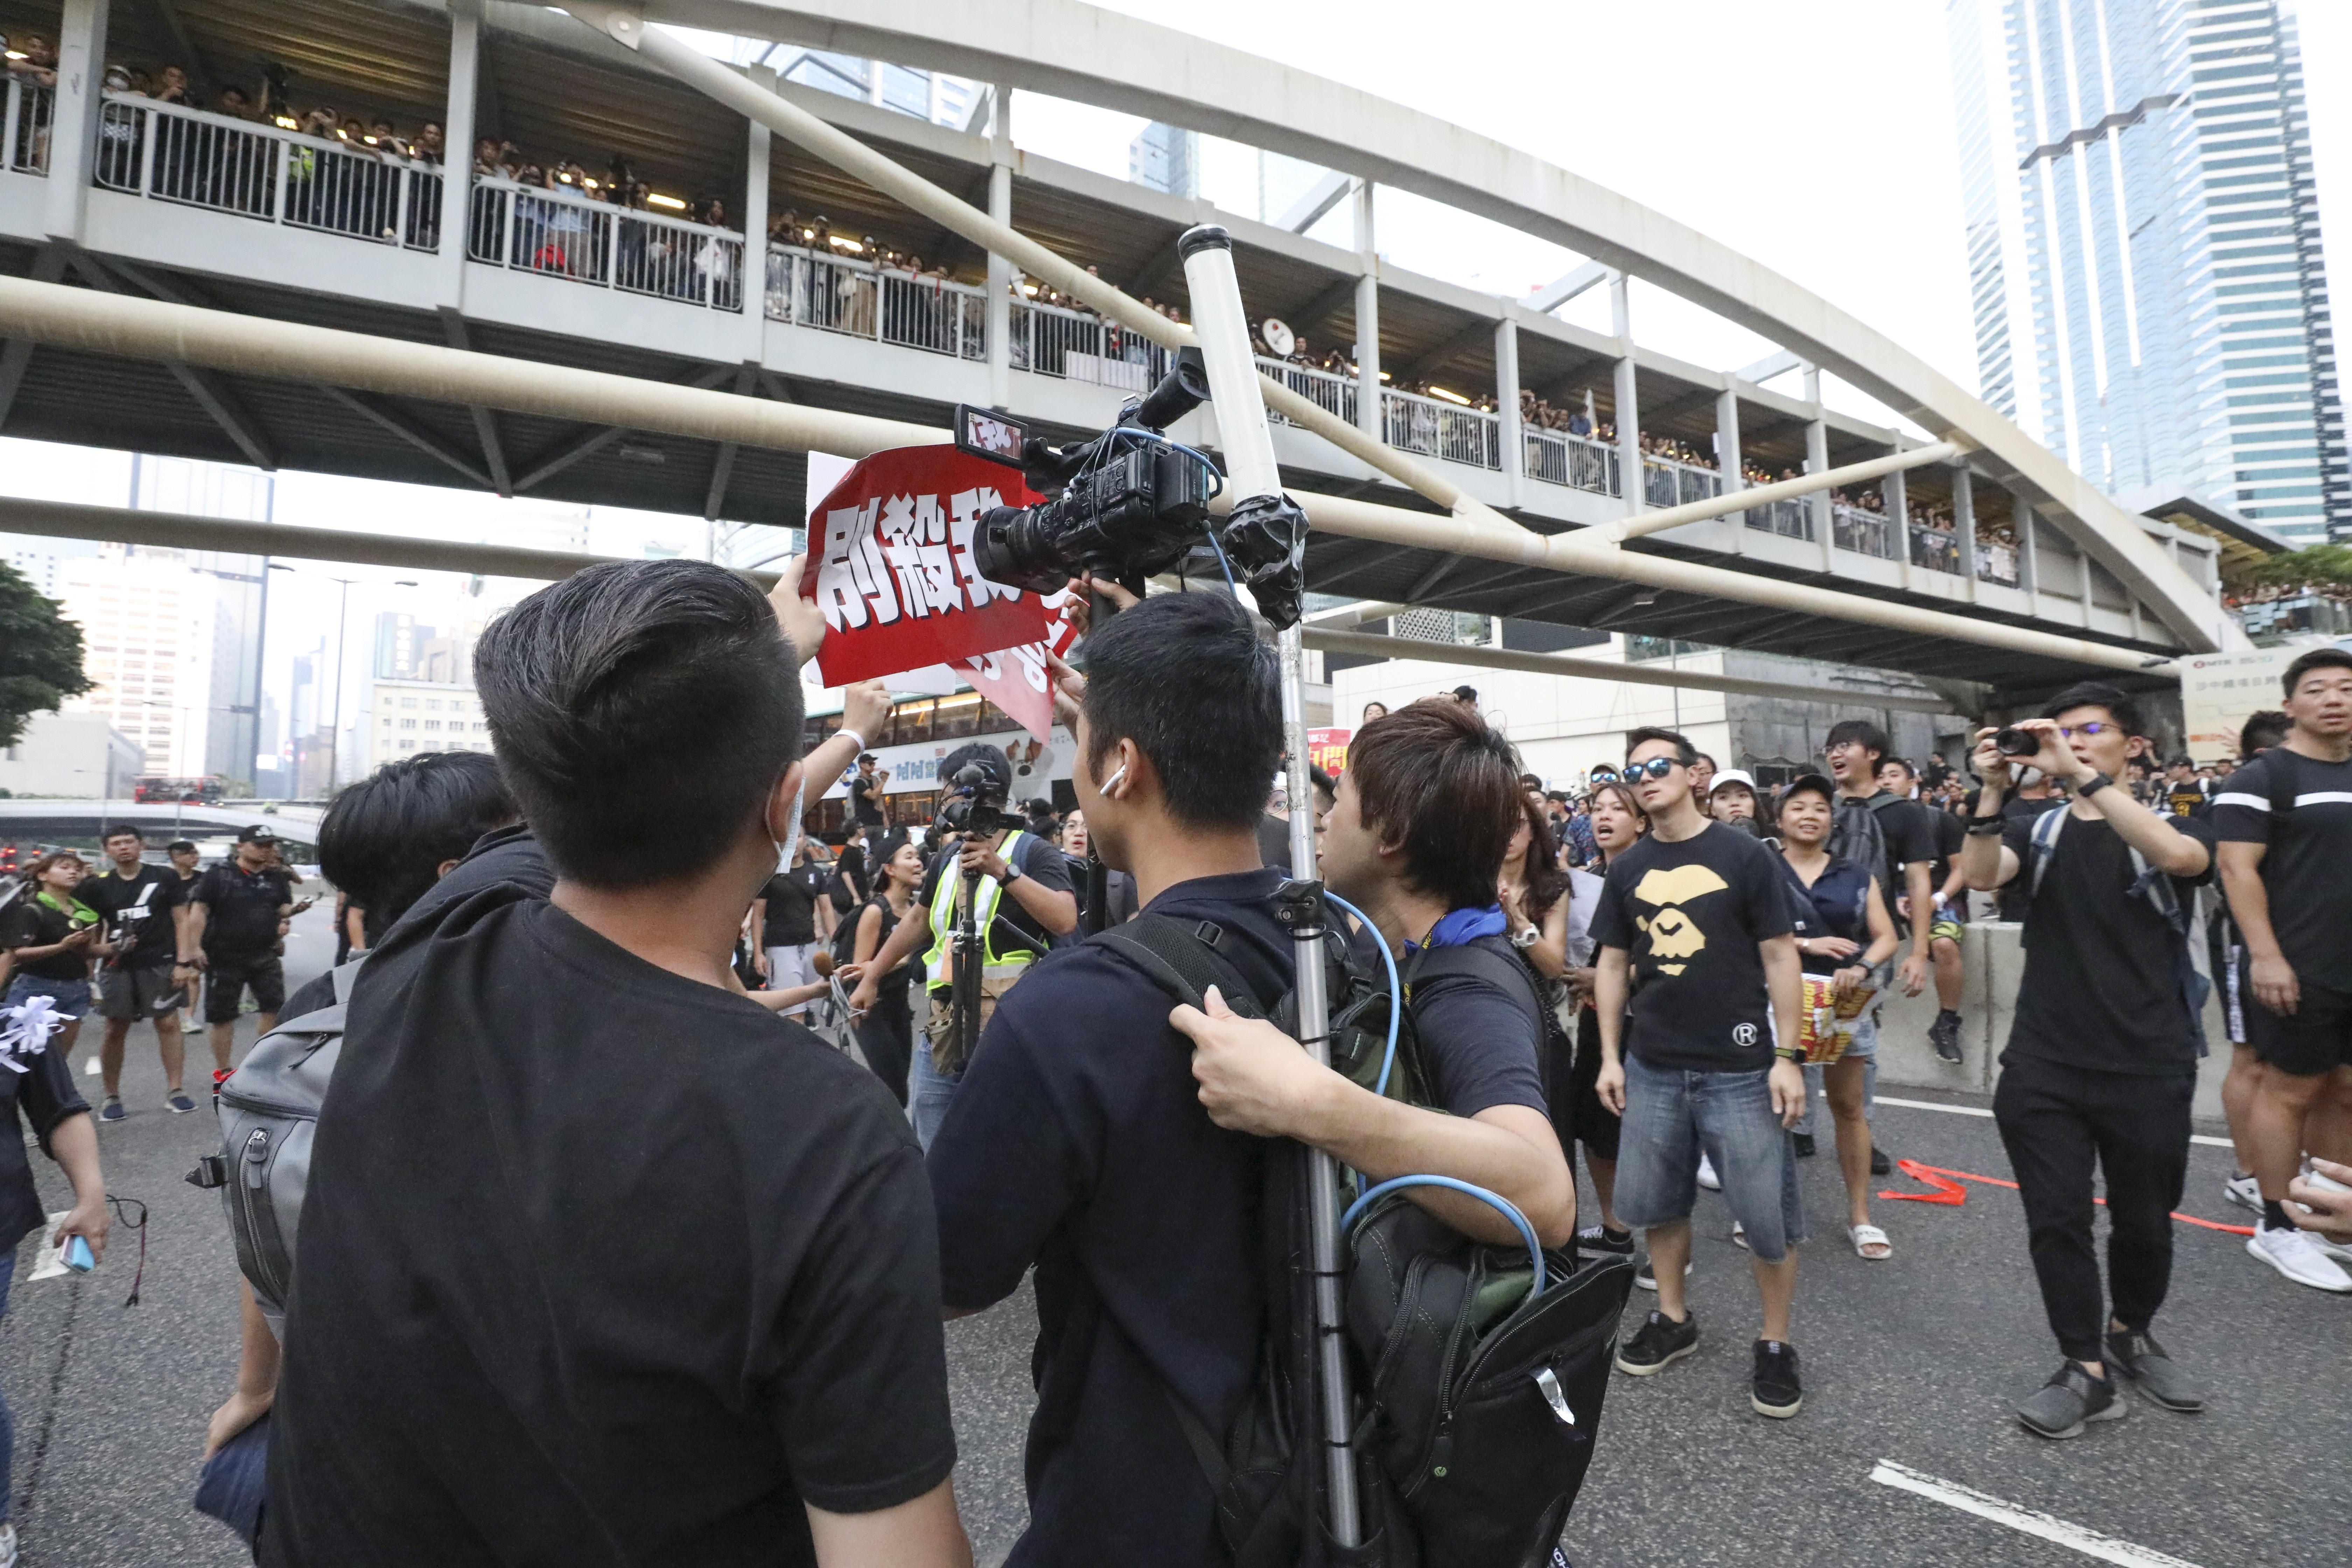 A TVB cameraman is harassed and pushed out of the protest zone during a rally in Tamar on June 16. Hong Kong netizens who accuse TVB of biased reporting and call for a boycott of the broadcaster are becoming as extreme as the mainland internet vigilantes who forced Lancôme to cancel Denise Ho’s concert. Photo: Antony Dickson